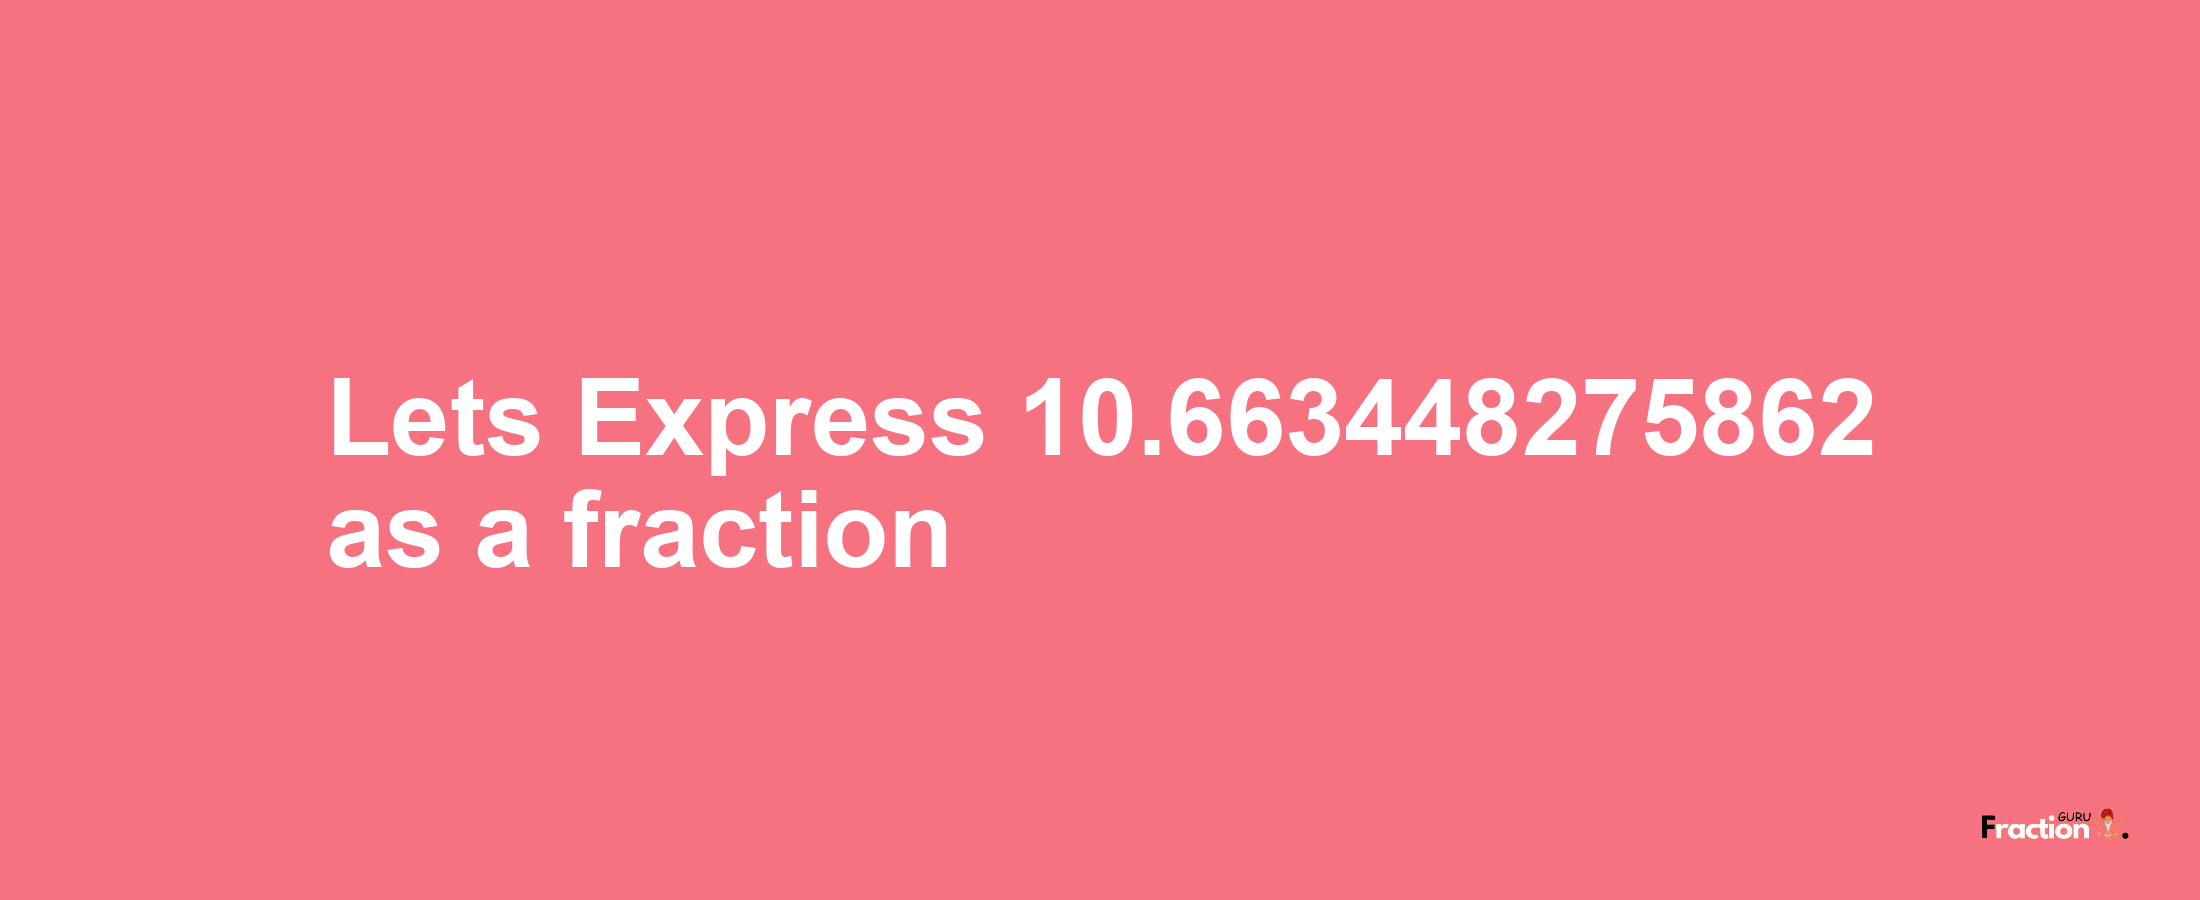 Lets Express 10.663448275862 as afraction